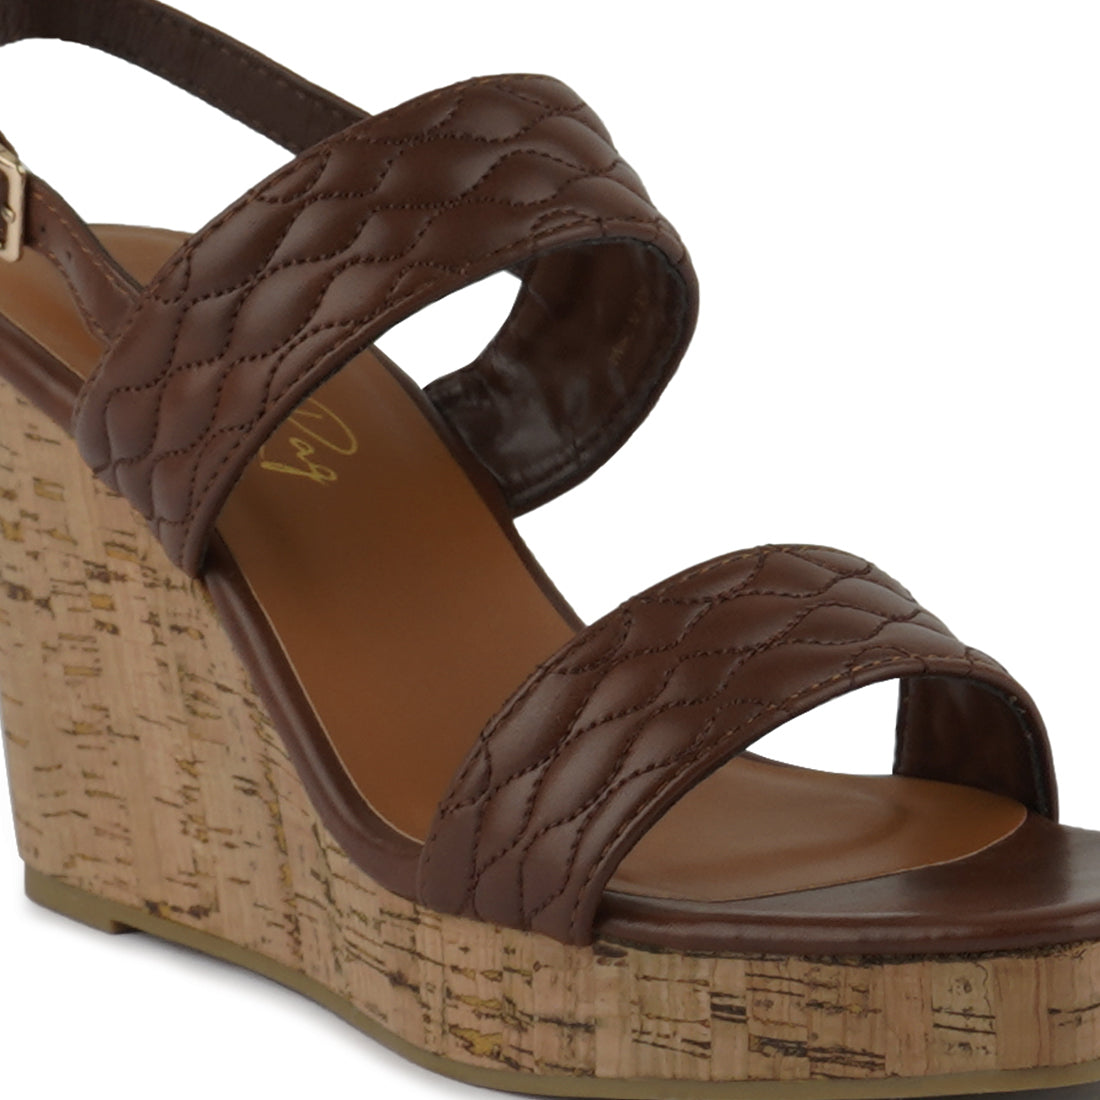 Brown Quilted High Wedge Heel Sandals